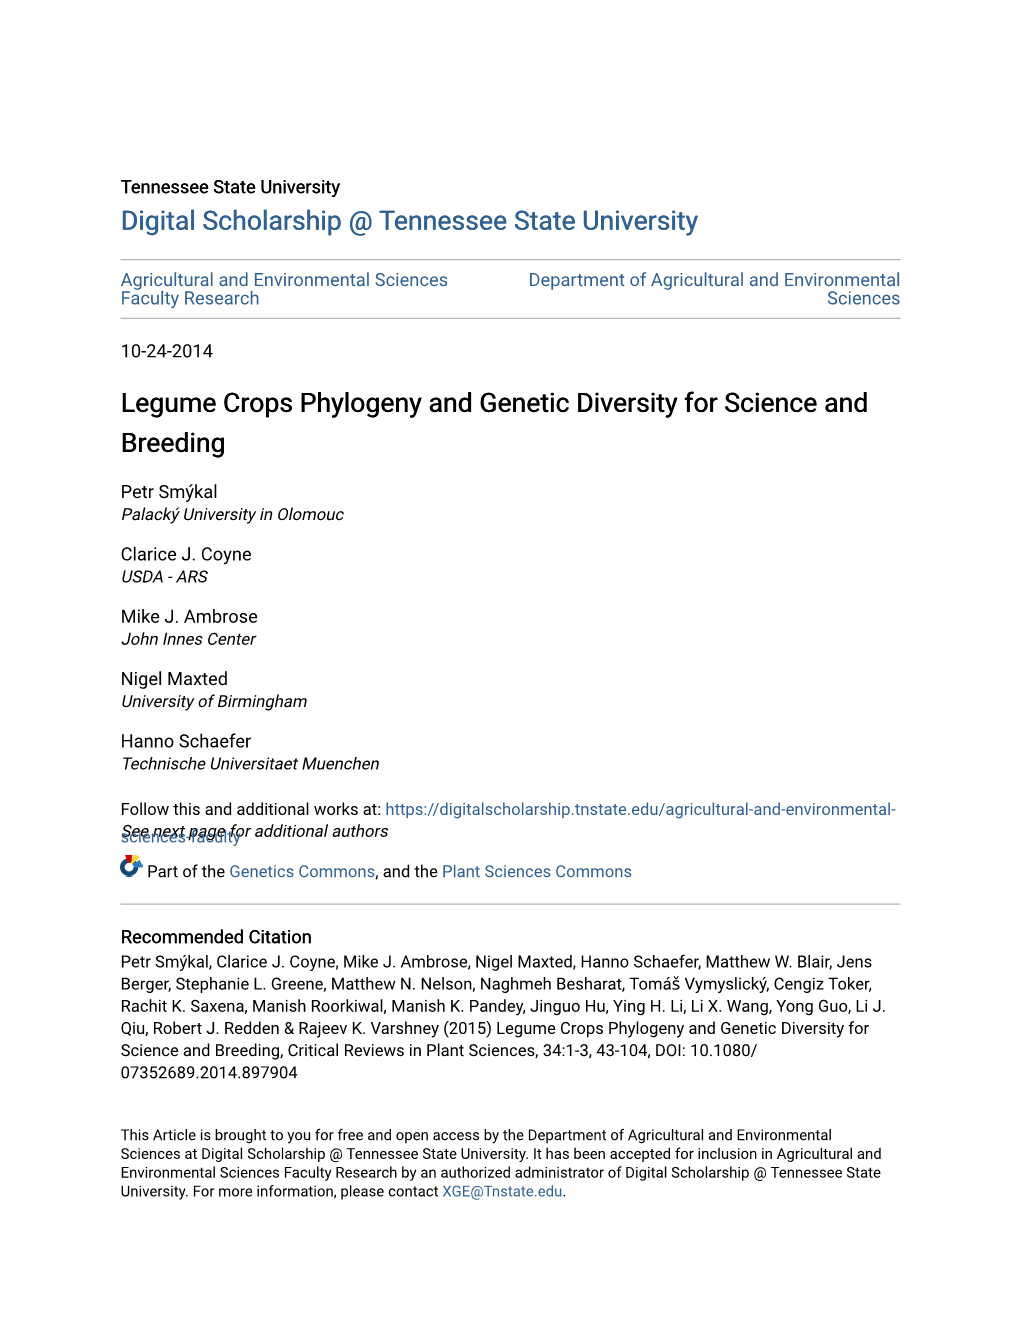 Legume Crops Phylogeny and Genetic Diversity for Science and Breeding